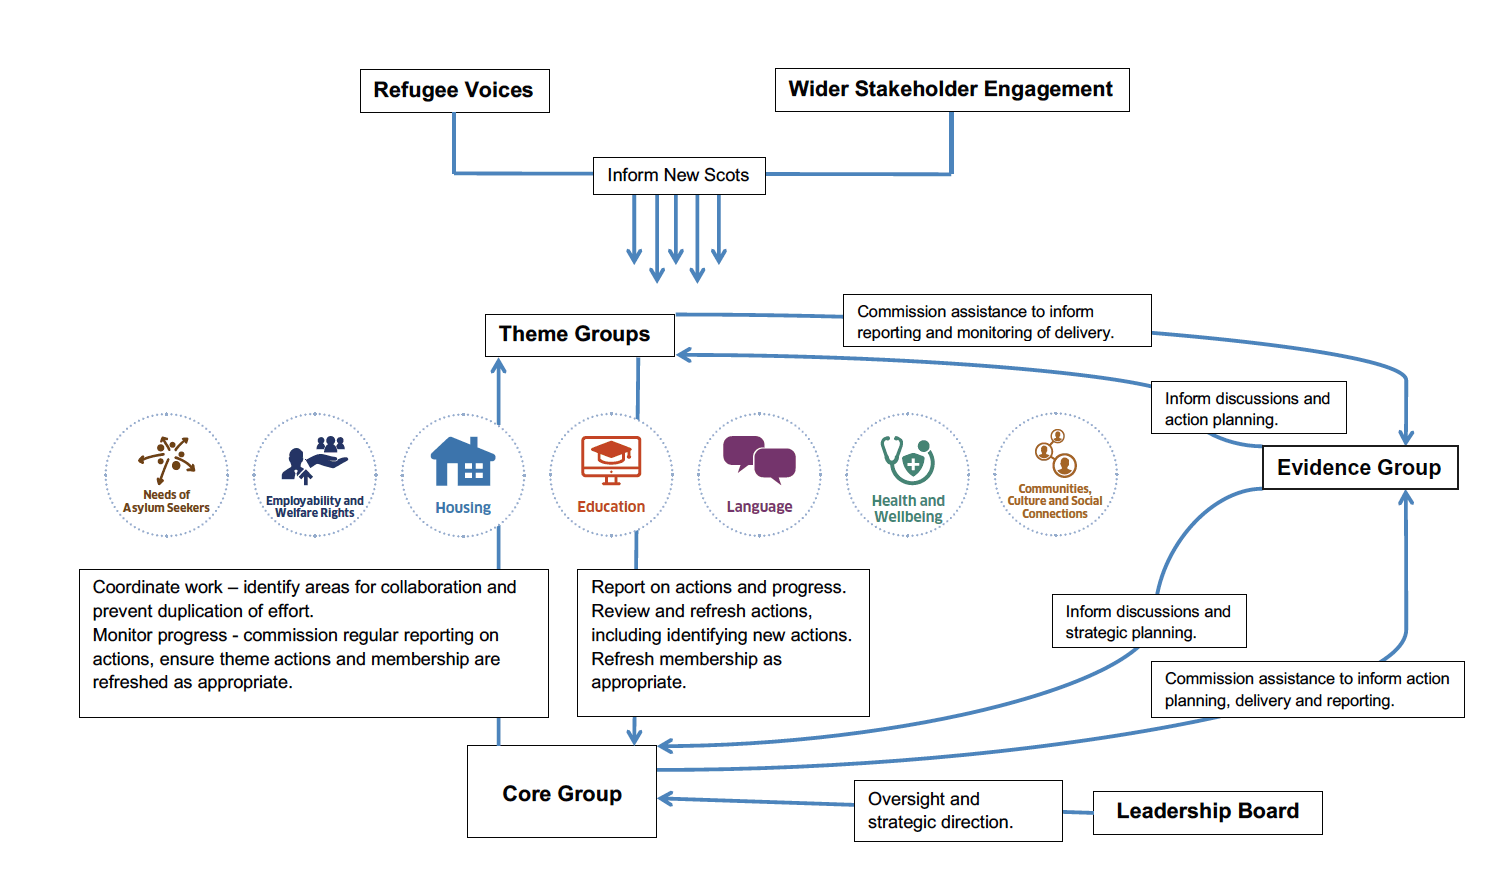 Structures which support delivery of the New Scots refugee integration strategy